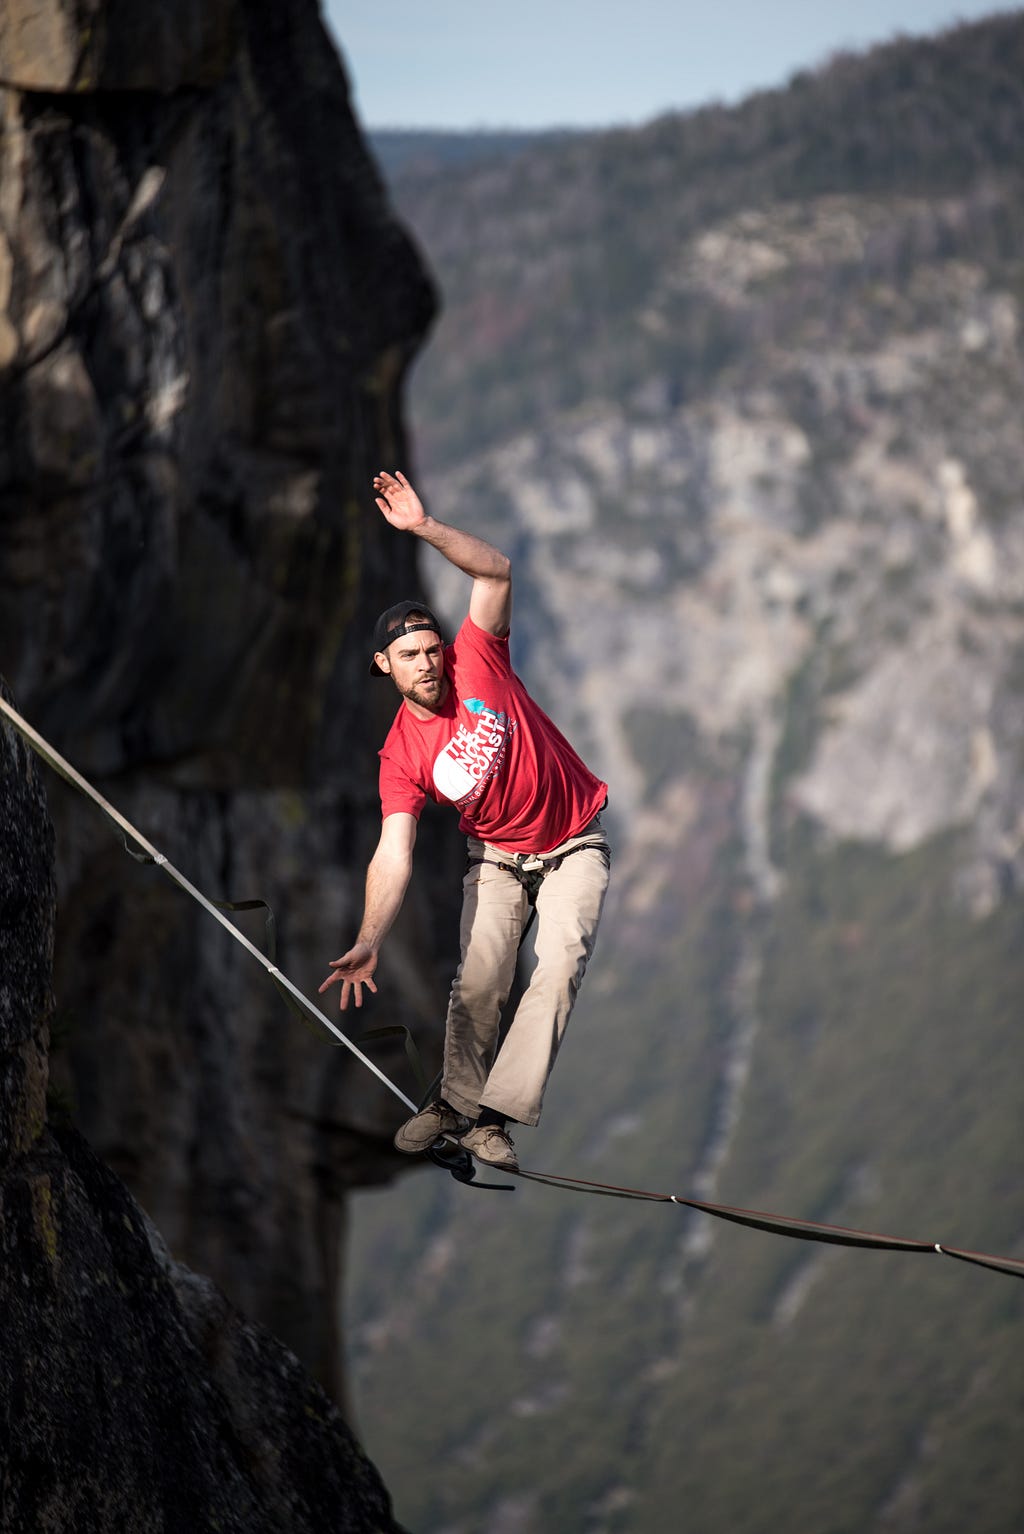 Man effortfully keeping balance on a tight rope between cliff faces with a very steep drop